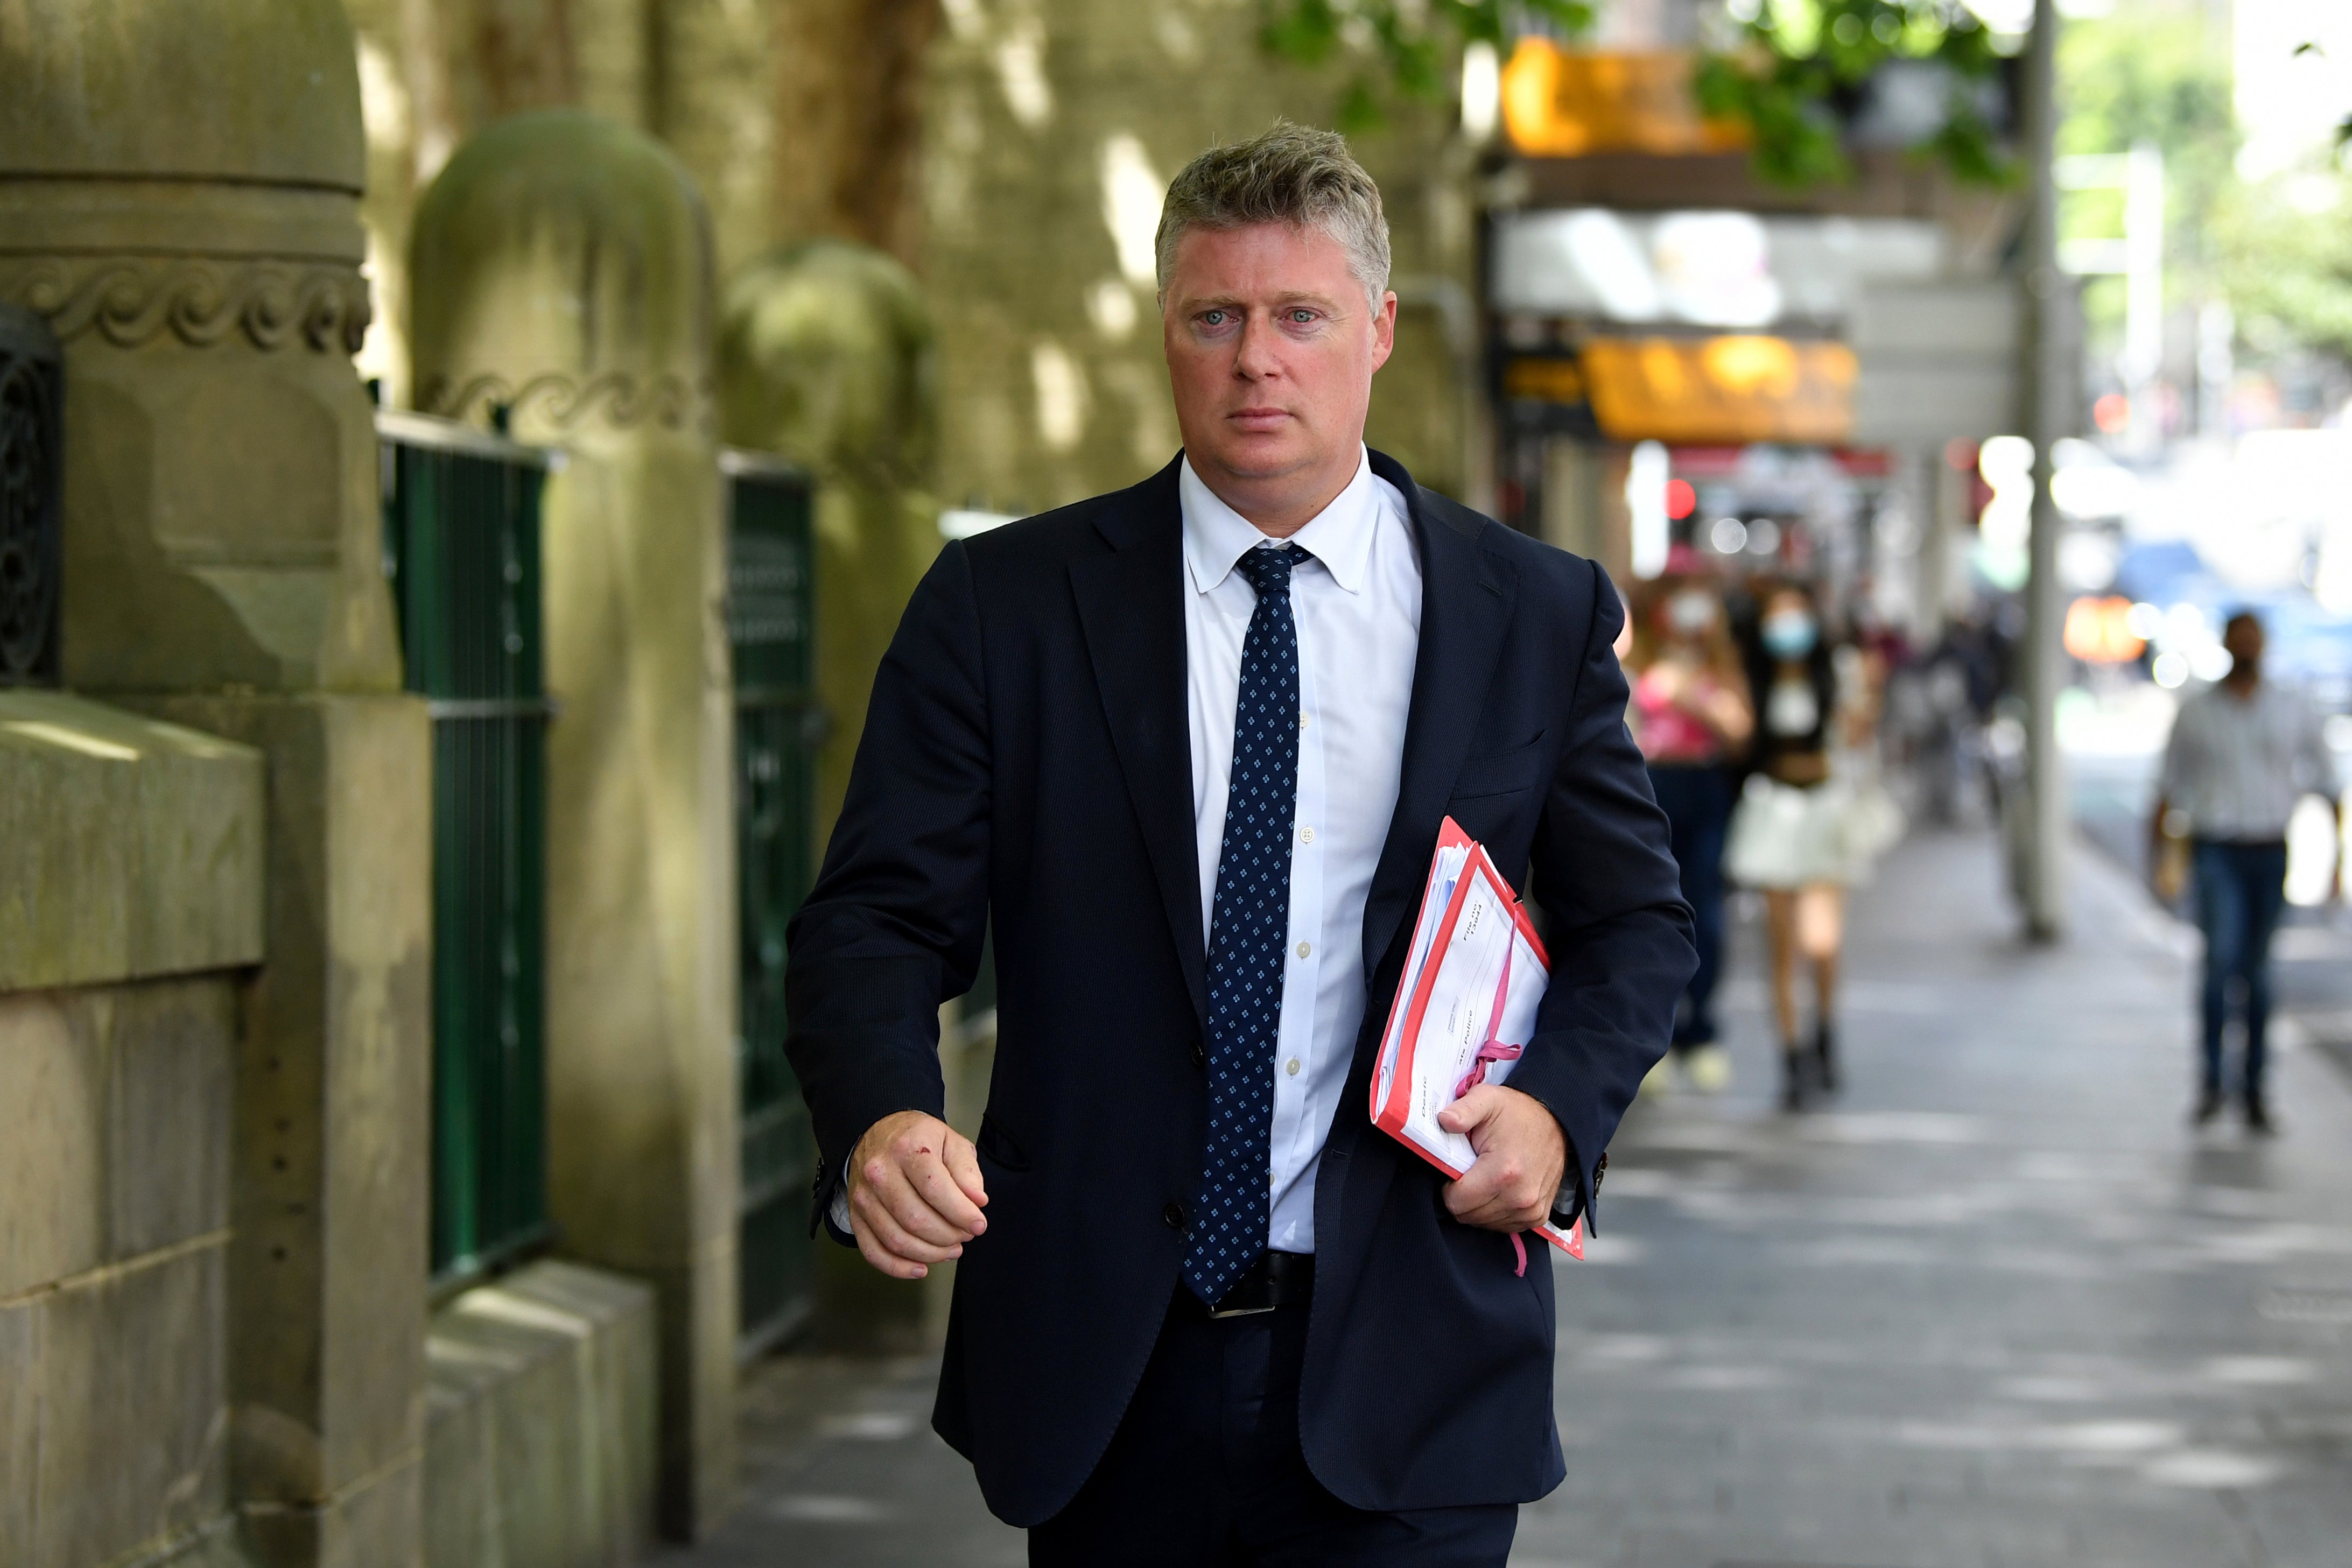 Lawyer Paul McGirr says his client earned the ‘love and respect’ of his community in Sydney